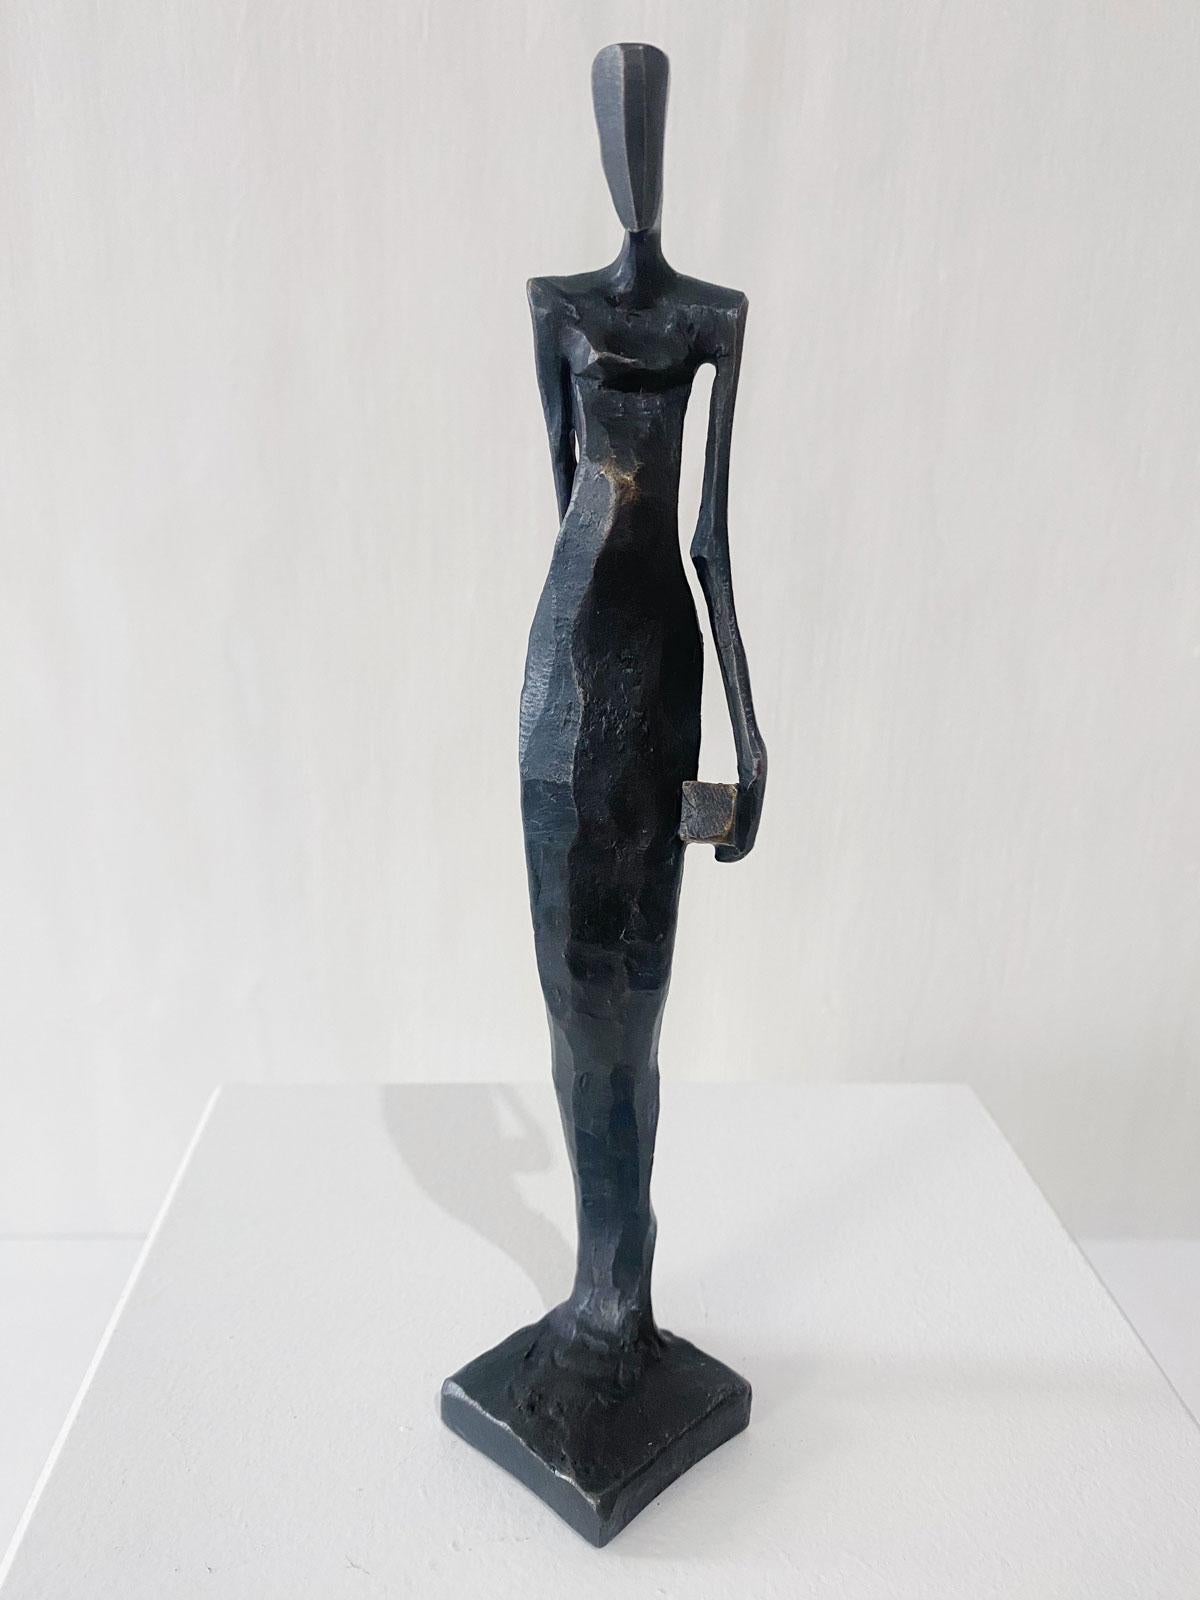 Woman with Dice is an elegant figurative bronze sculpture by Nando Kallweit.

Modelled on modern youthful postures but with a nod to the importance of heritage through the stylised Egyptian-influenced head. A lovely piece on its own or with a group